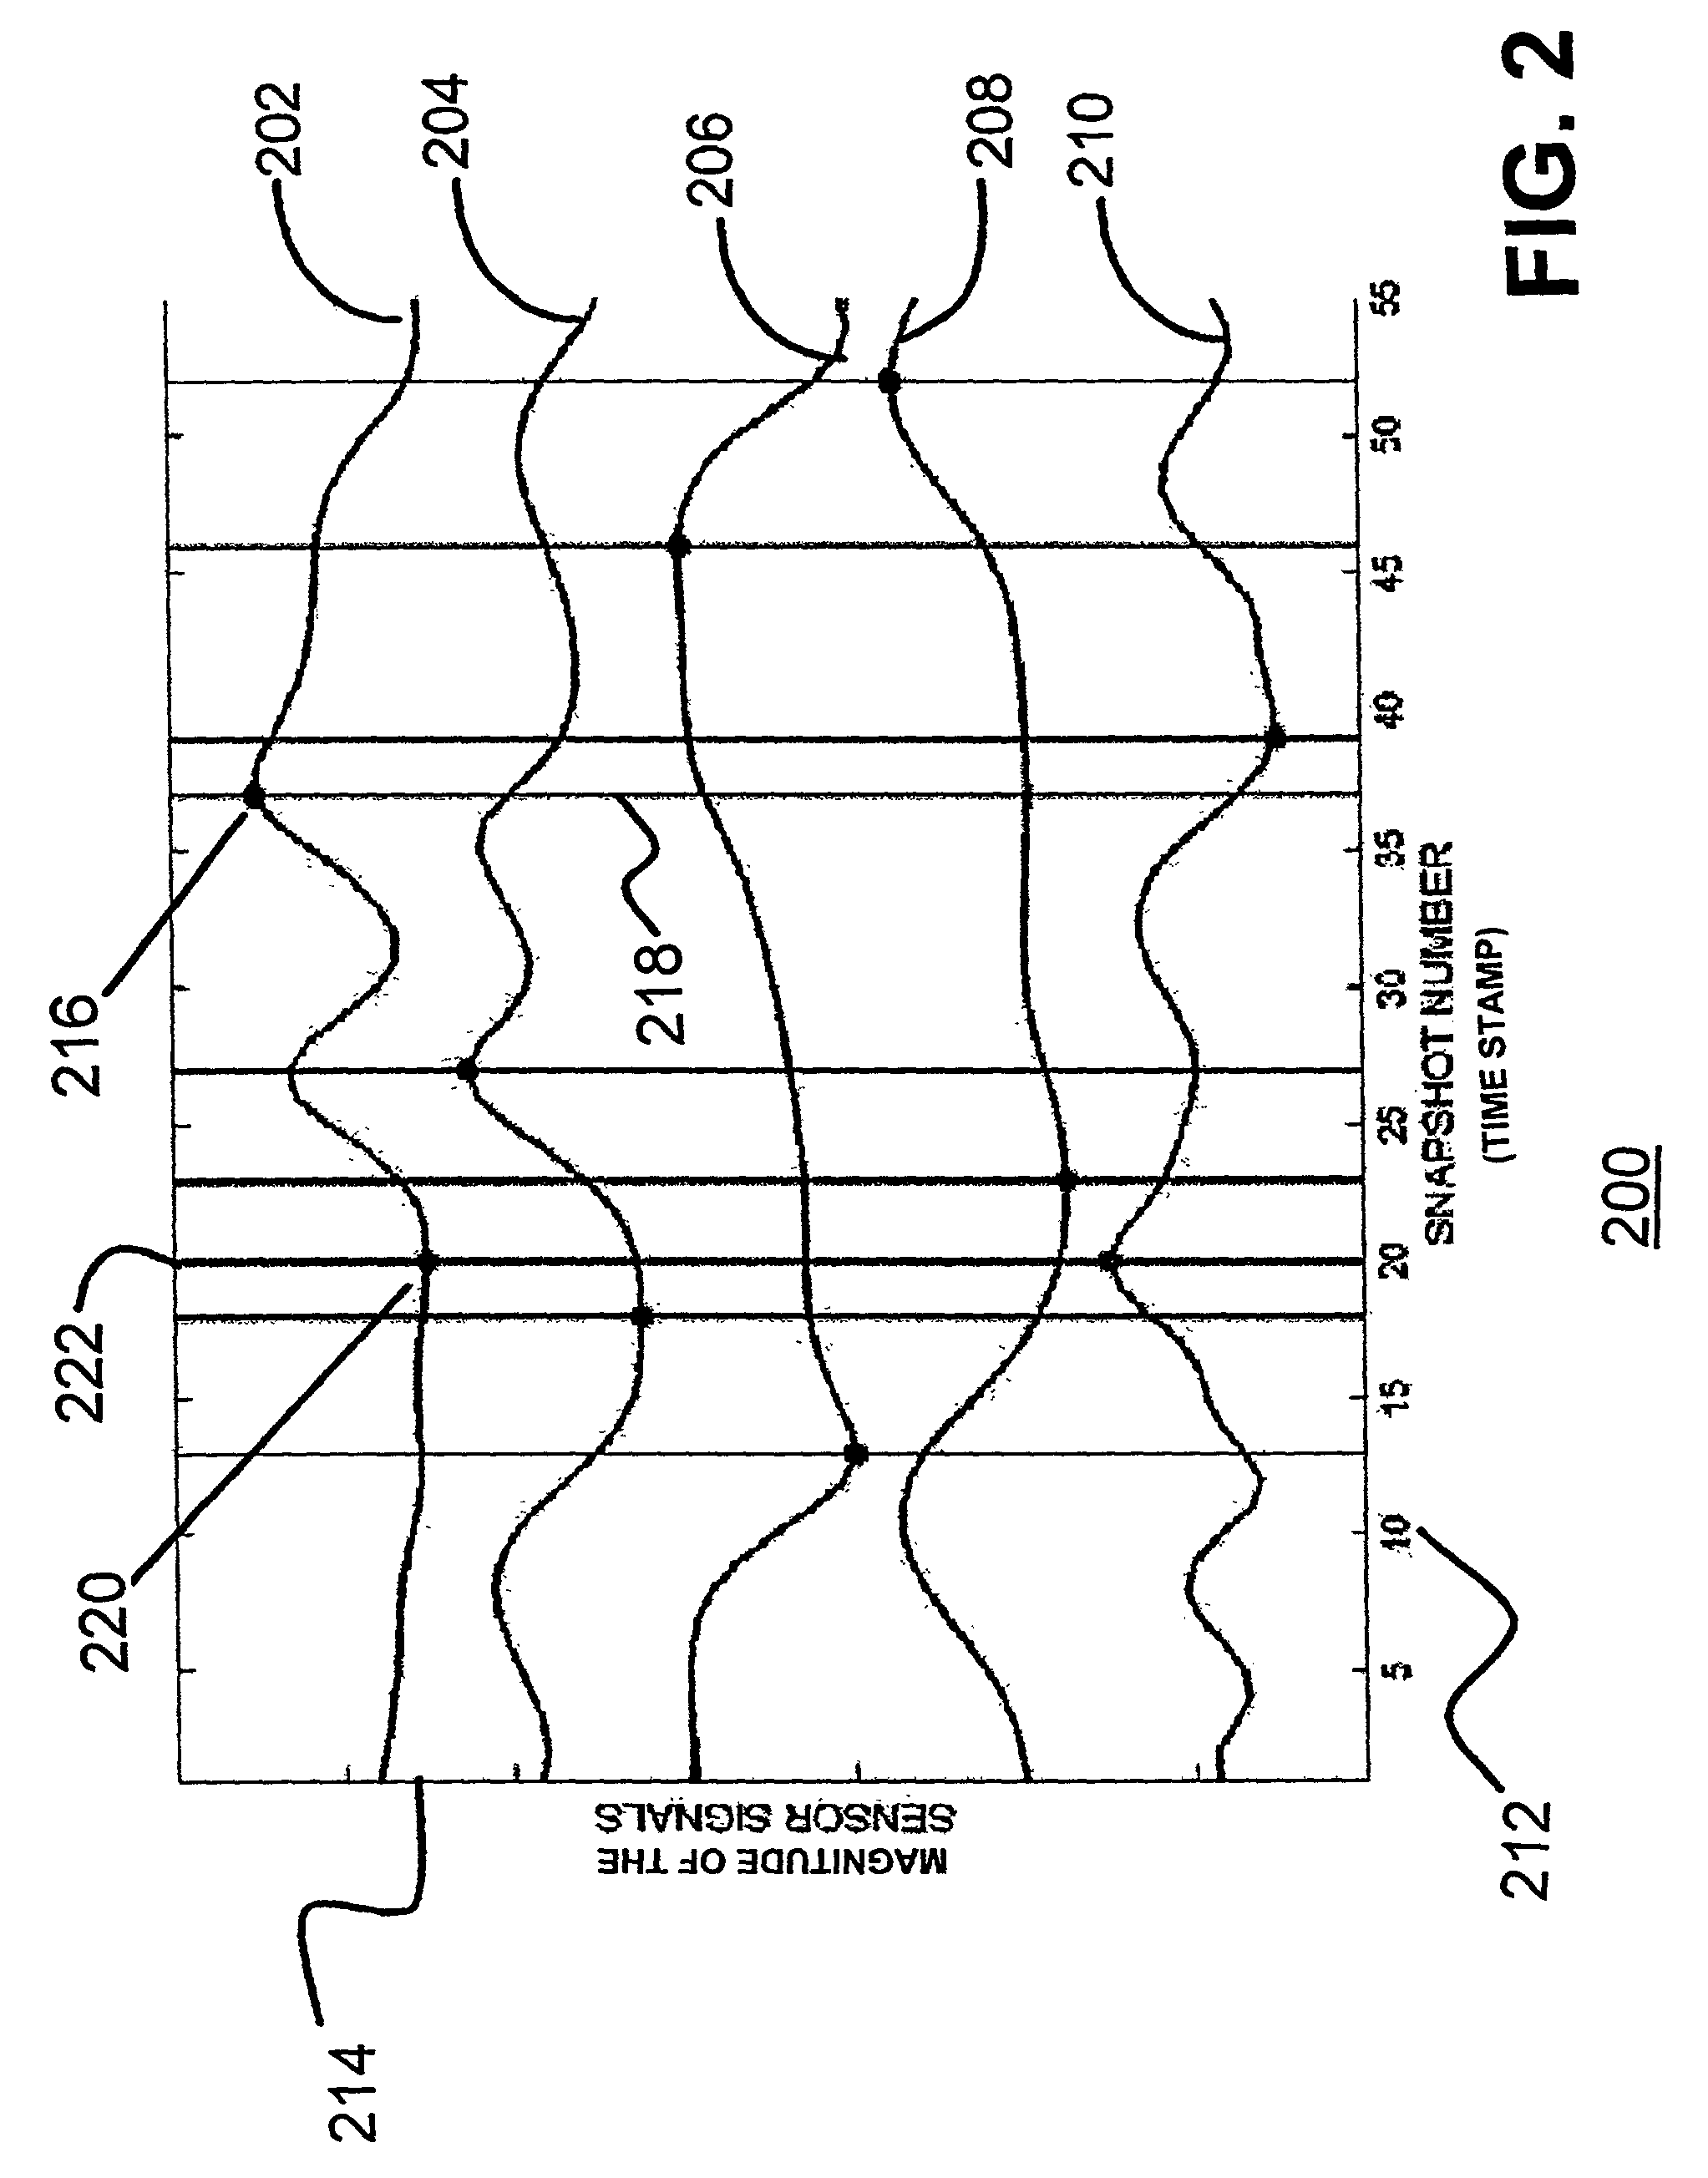 Monitoring and fault detection system and method using improved empirical model for range extrema